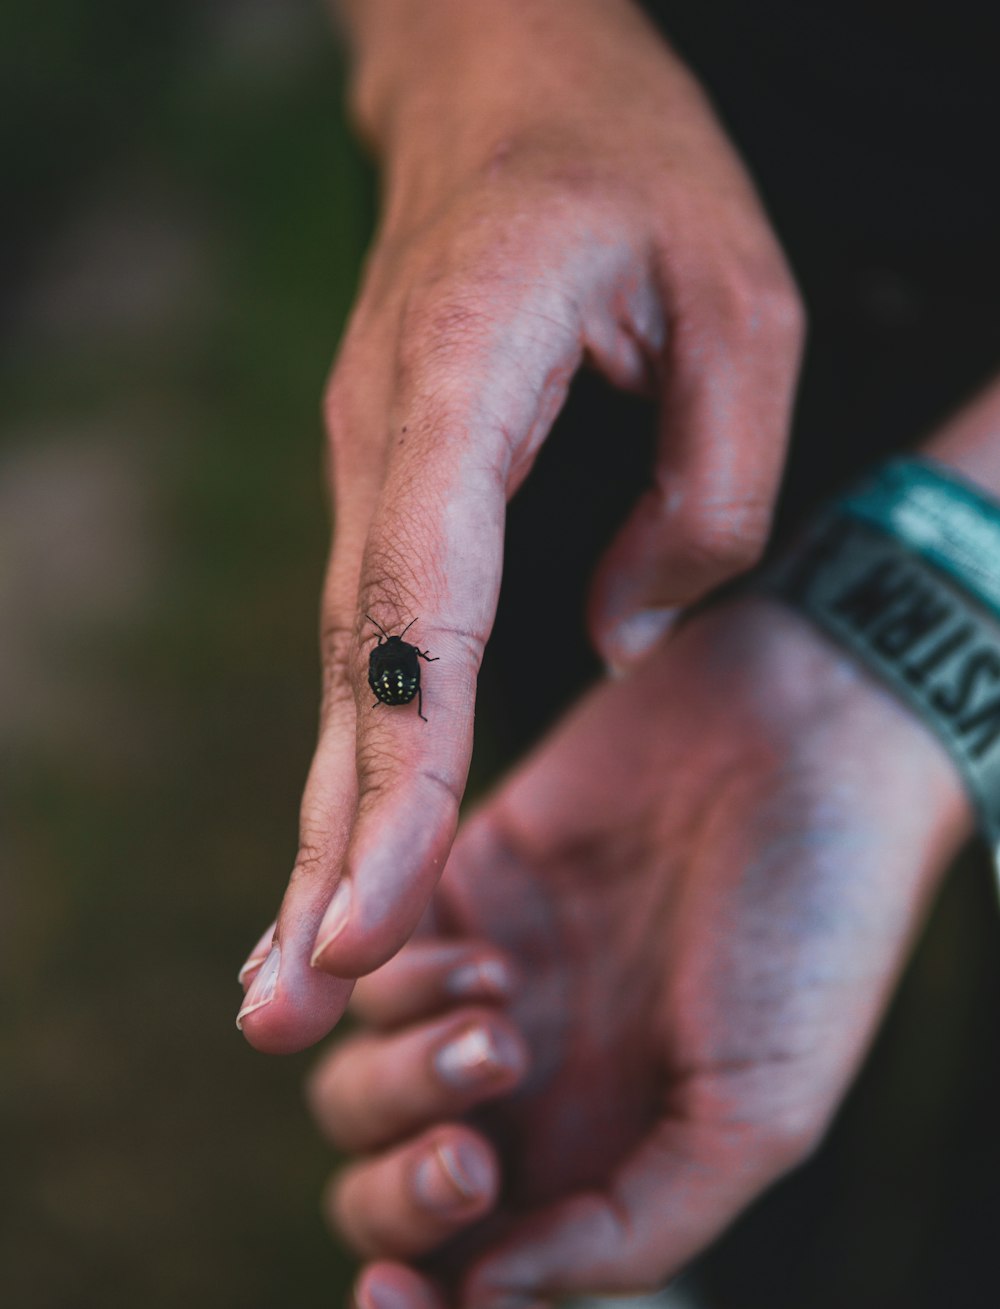 a person's hand holding a tiny black object